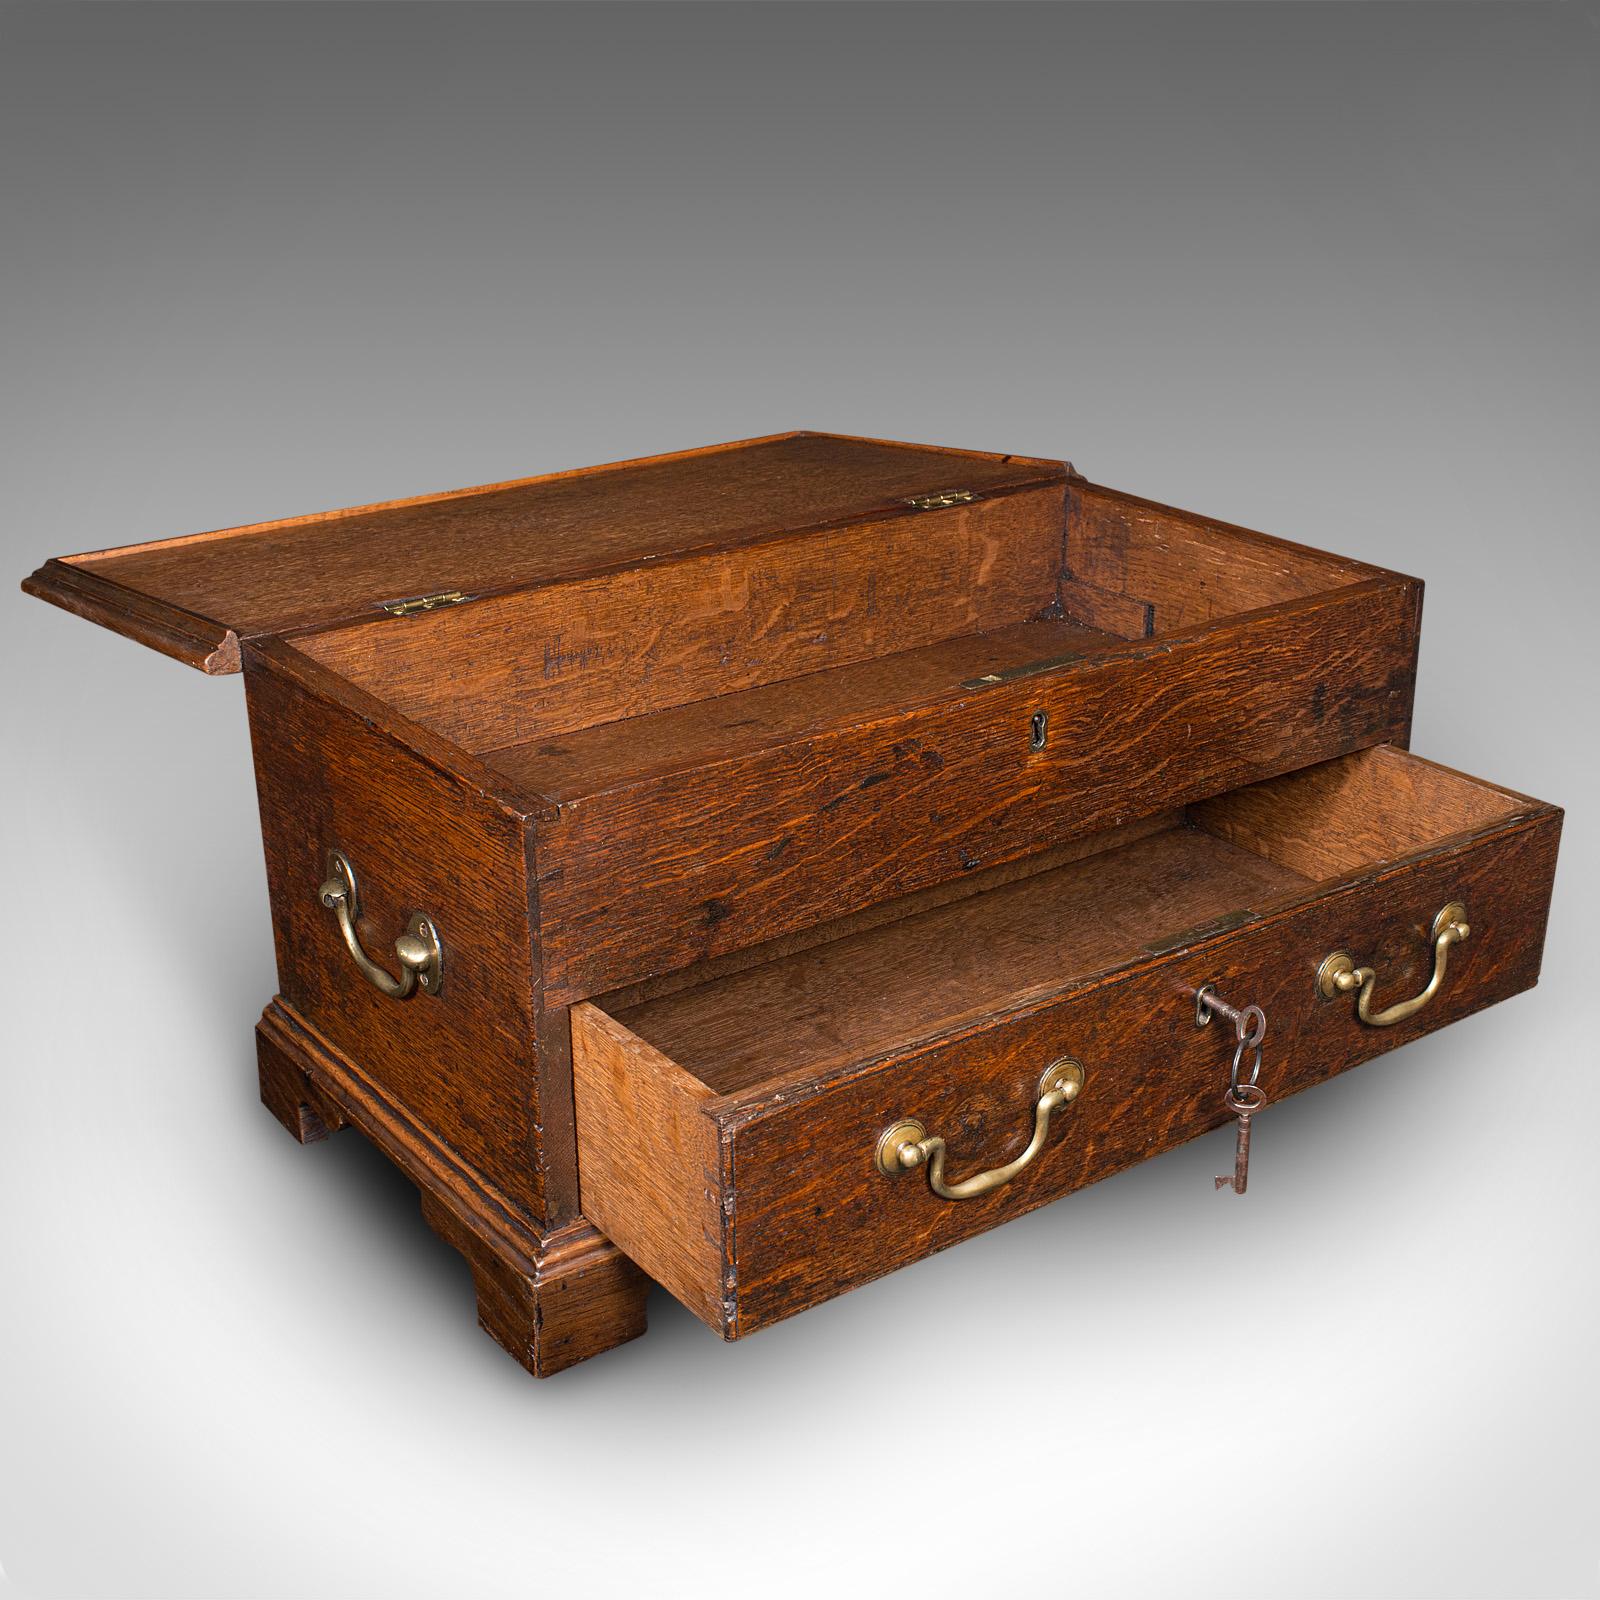 This is an antique apprentice mule chest. An English, oak miniature desktop coffer, dating to the late Georgian period, circa 1800.

Wonderful desk storage box, a great example of apprentice furniture
Displays a desirable aged patina and in good